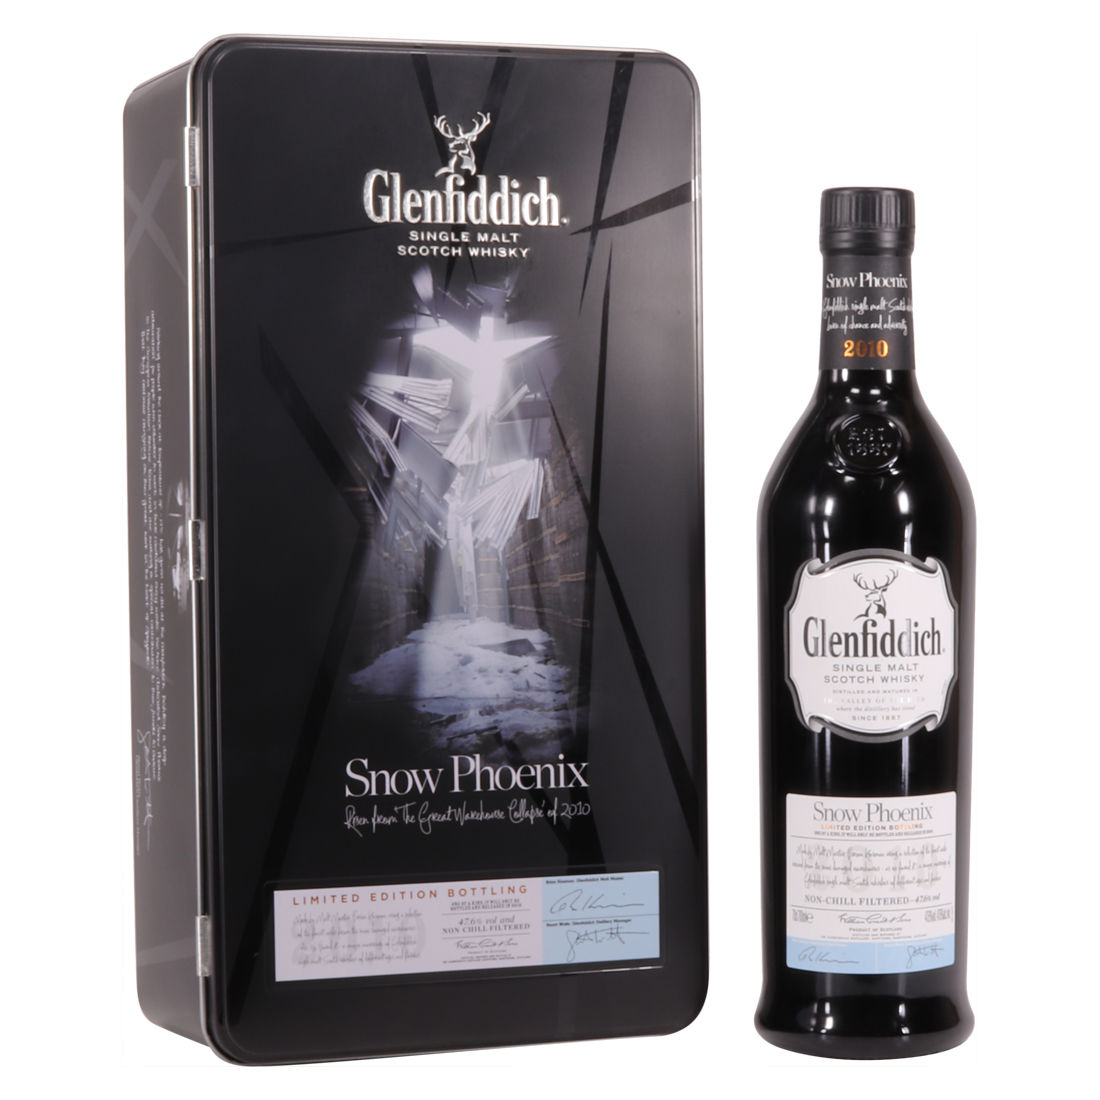 Glenfiddich Snow Phoenix Limited Edition Auction The Grand Whisky Auction